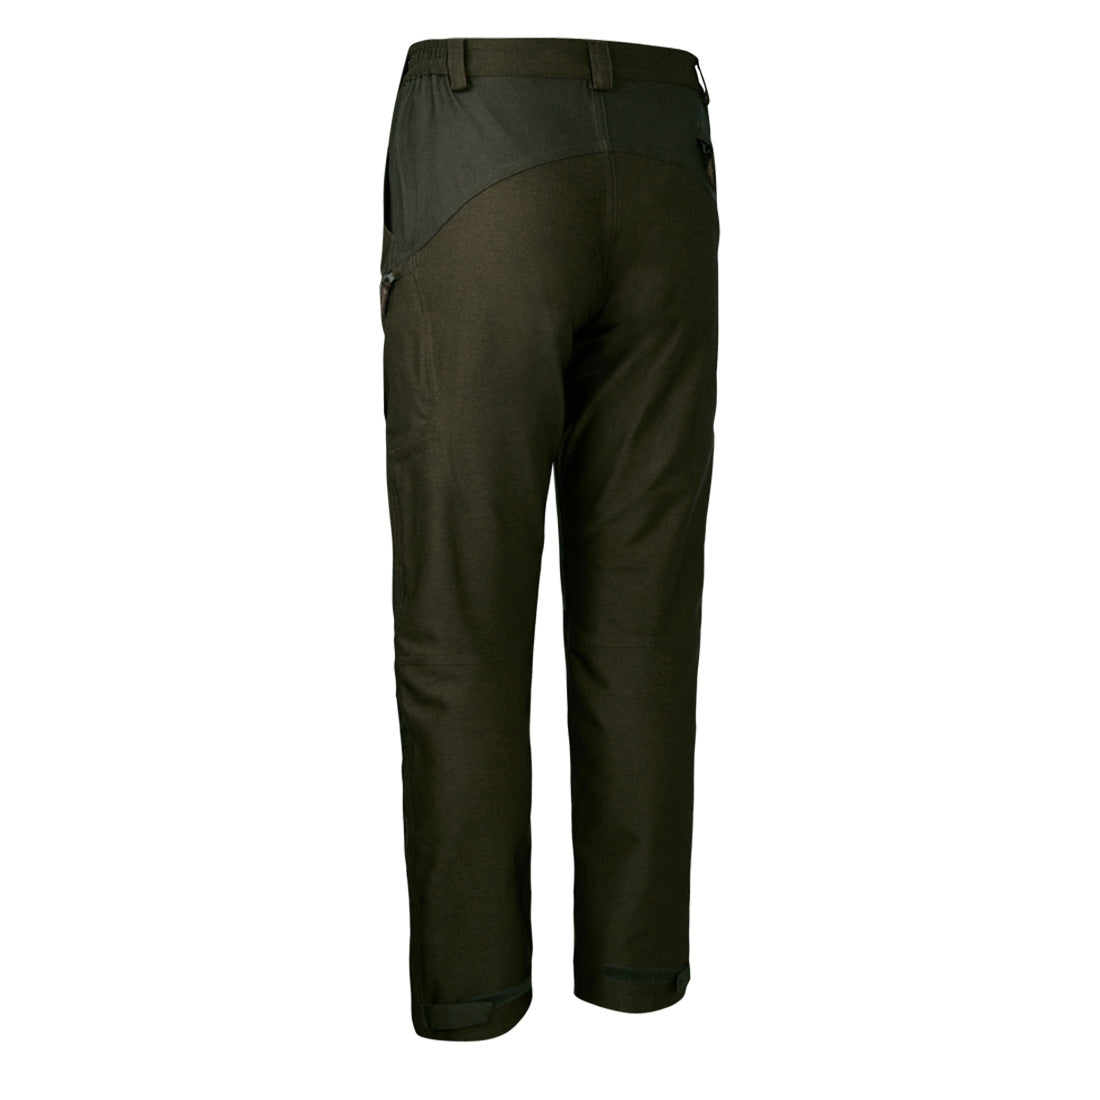 Deerhunter Lady Chasse Trousers Olive Night Melange | The Sporting Lodge